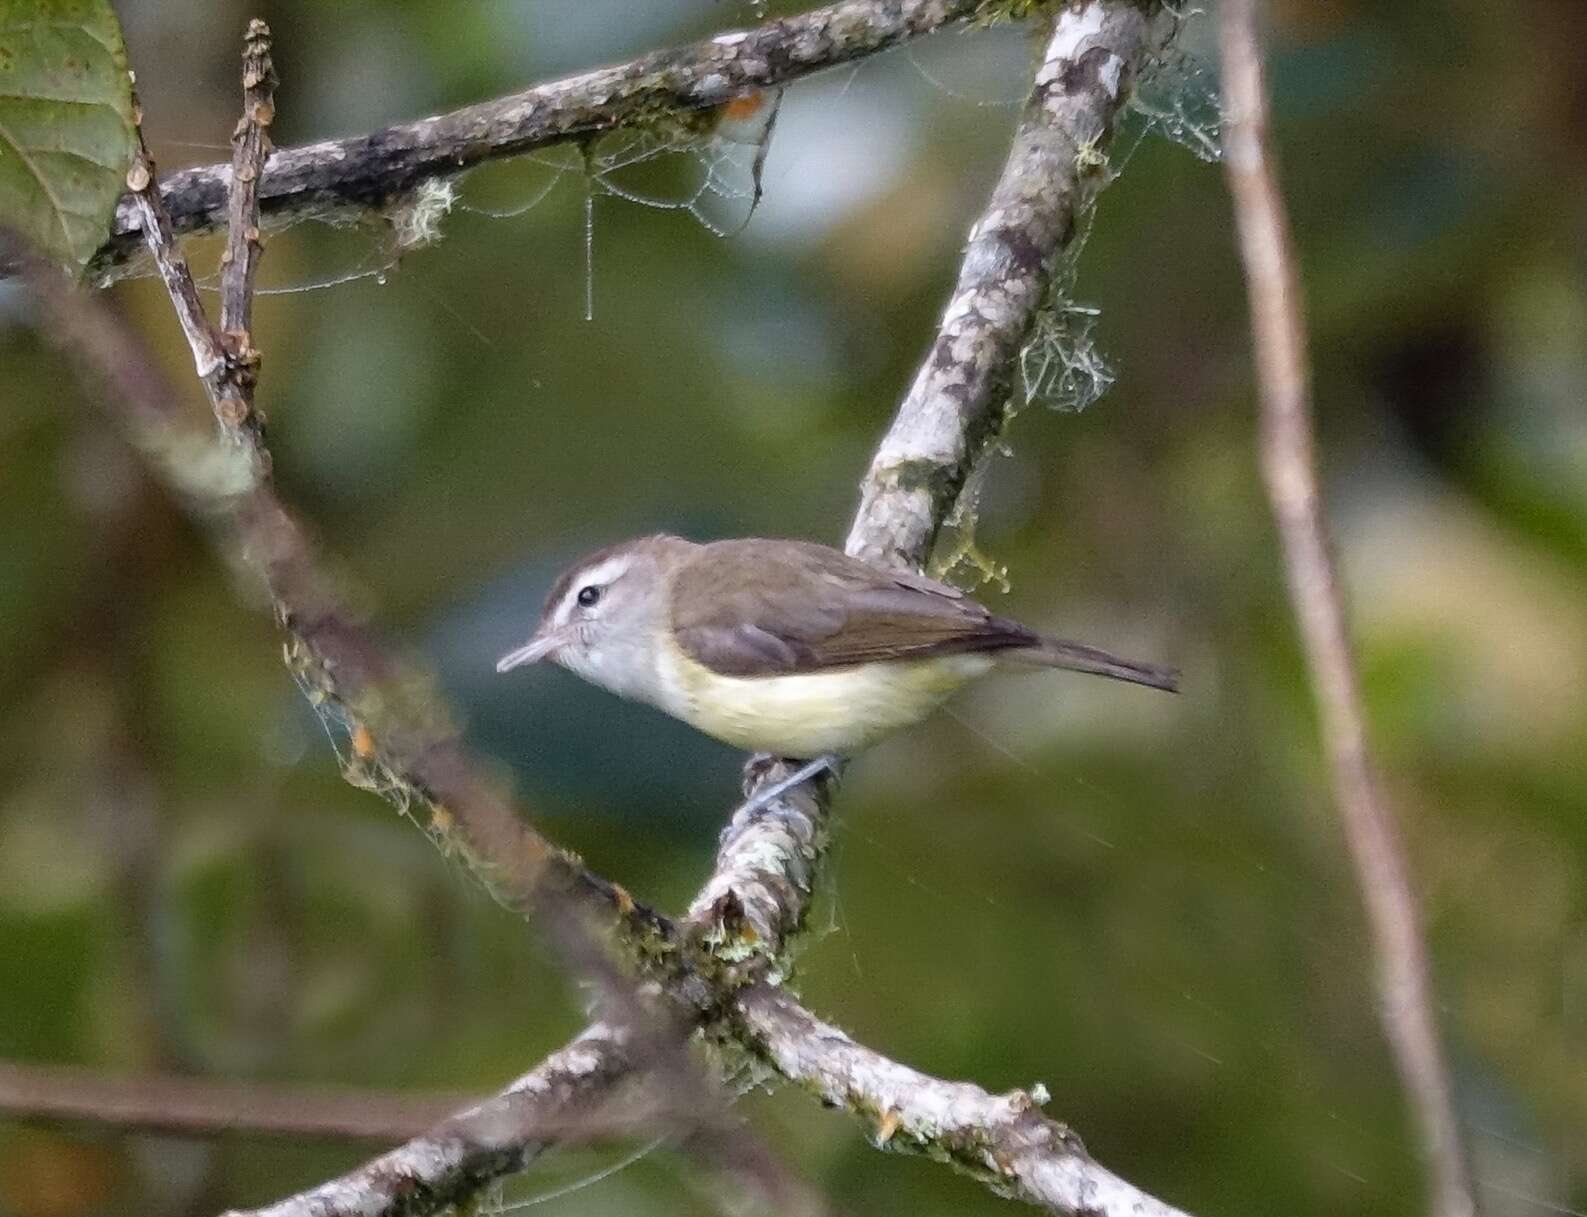 Image of Brown-capped Vireo